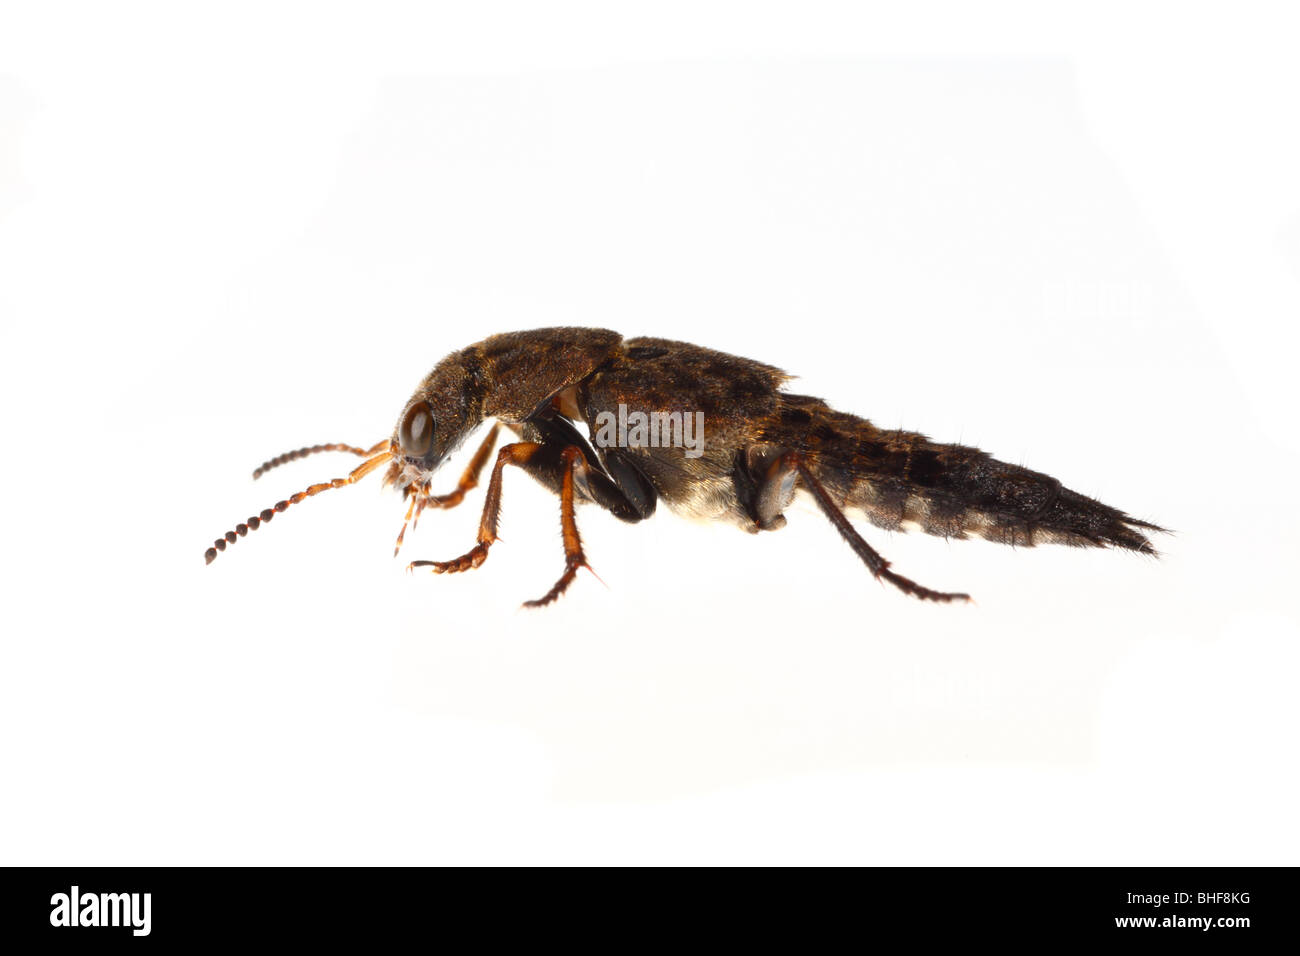 Rove Beetle (Creophilus maxillosus). Live insect photographed against a white background on a portable studio. Stock Photo